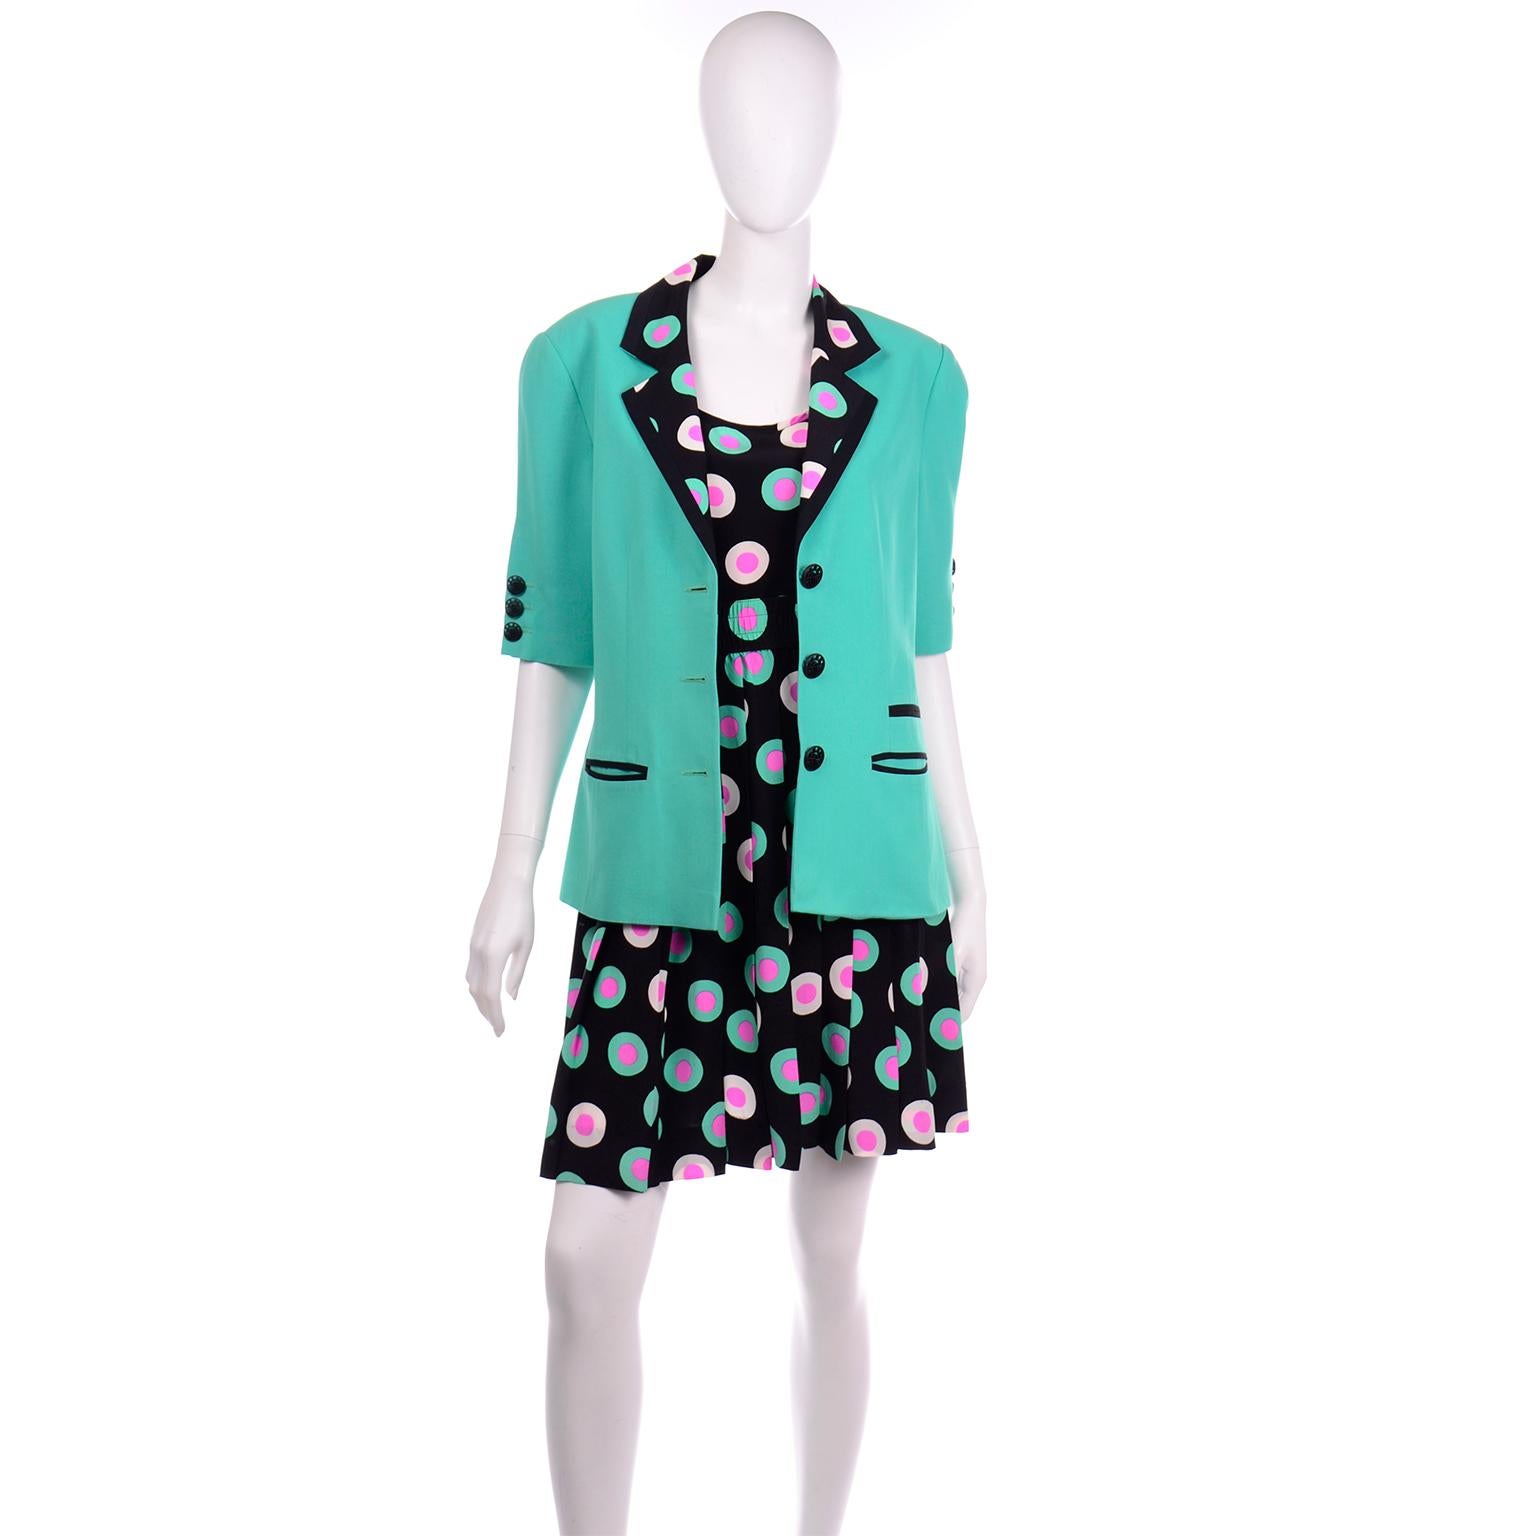 Louis Feraud 3Pc Suit Silk Black Green & Pink Dot 2pc Dress & Mint Green Jacket In Excellent Condition For Sale In Portland, OR